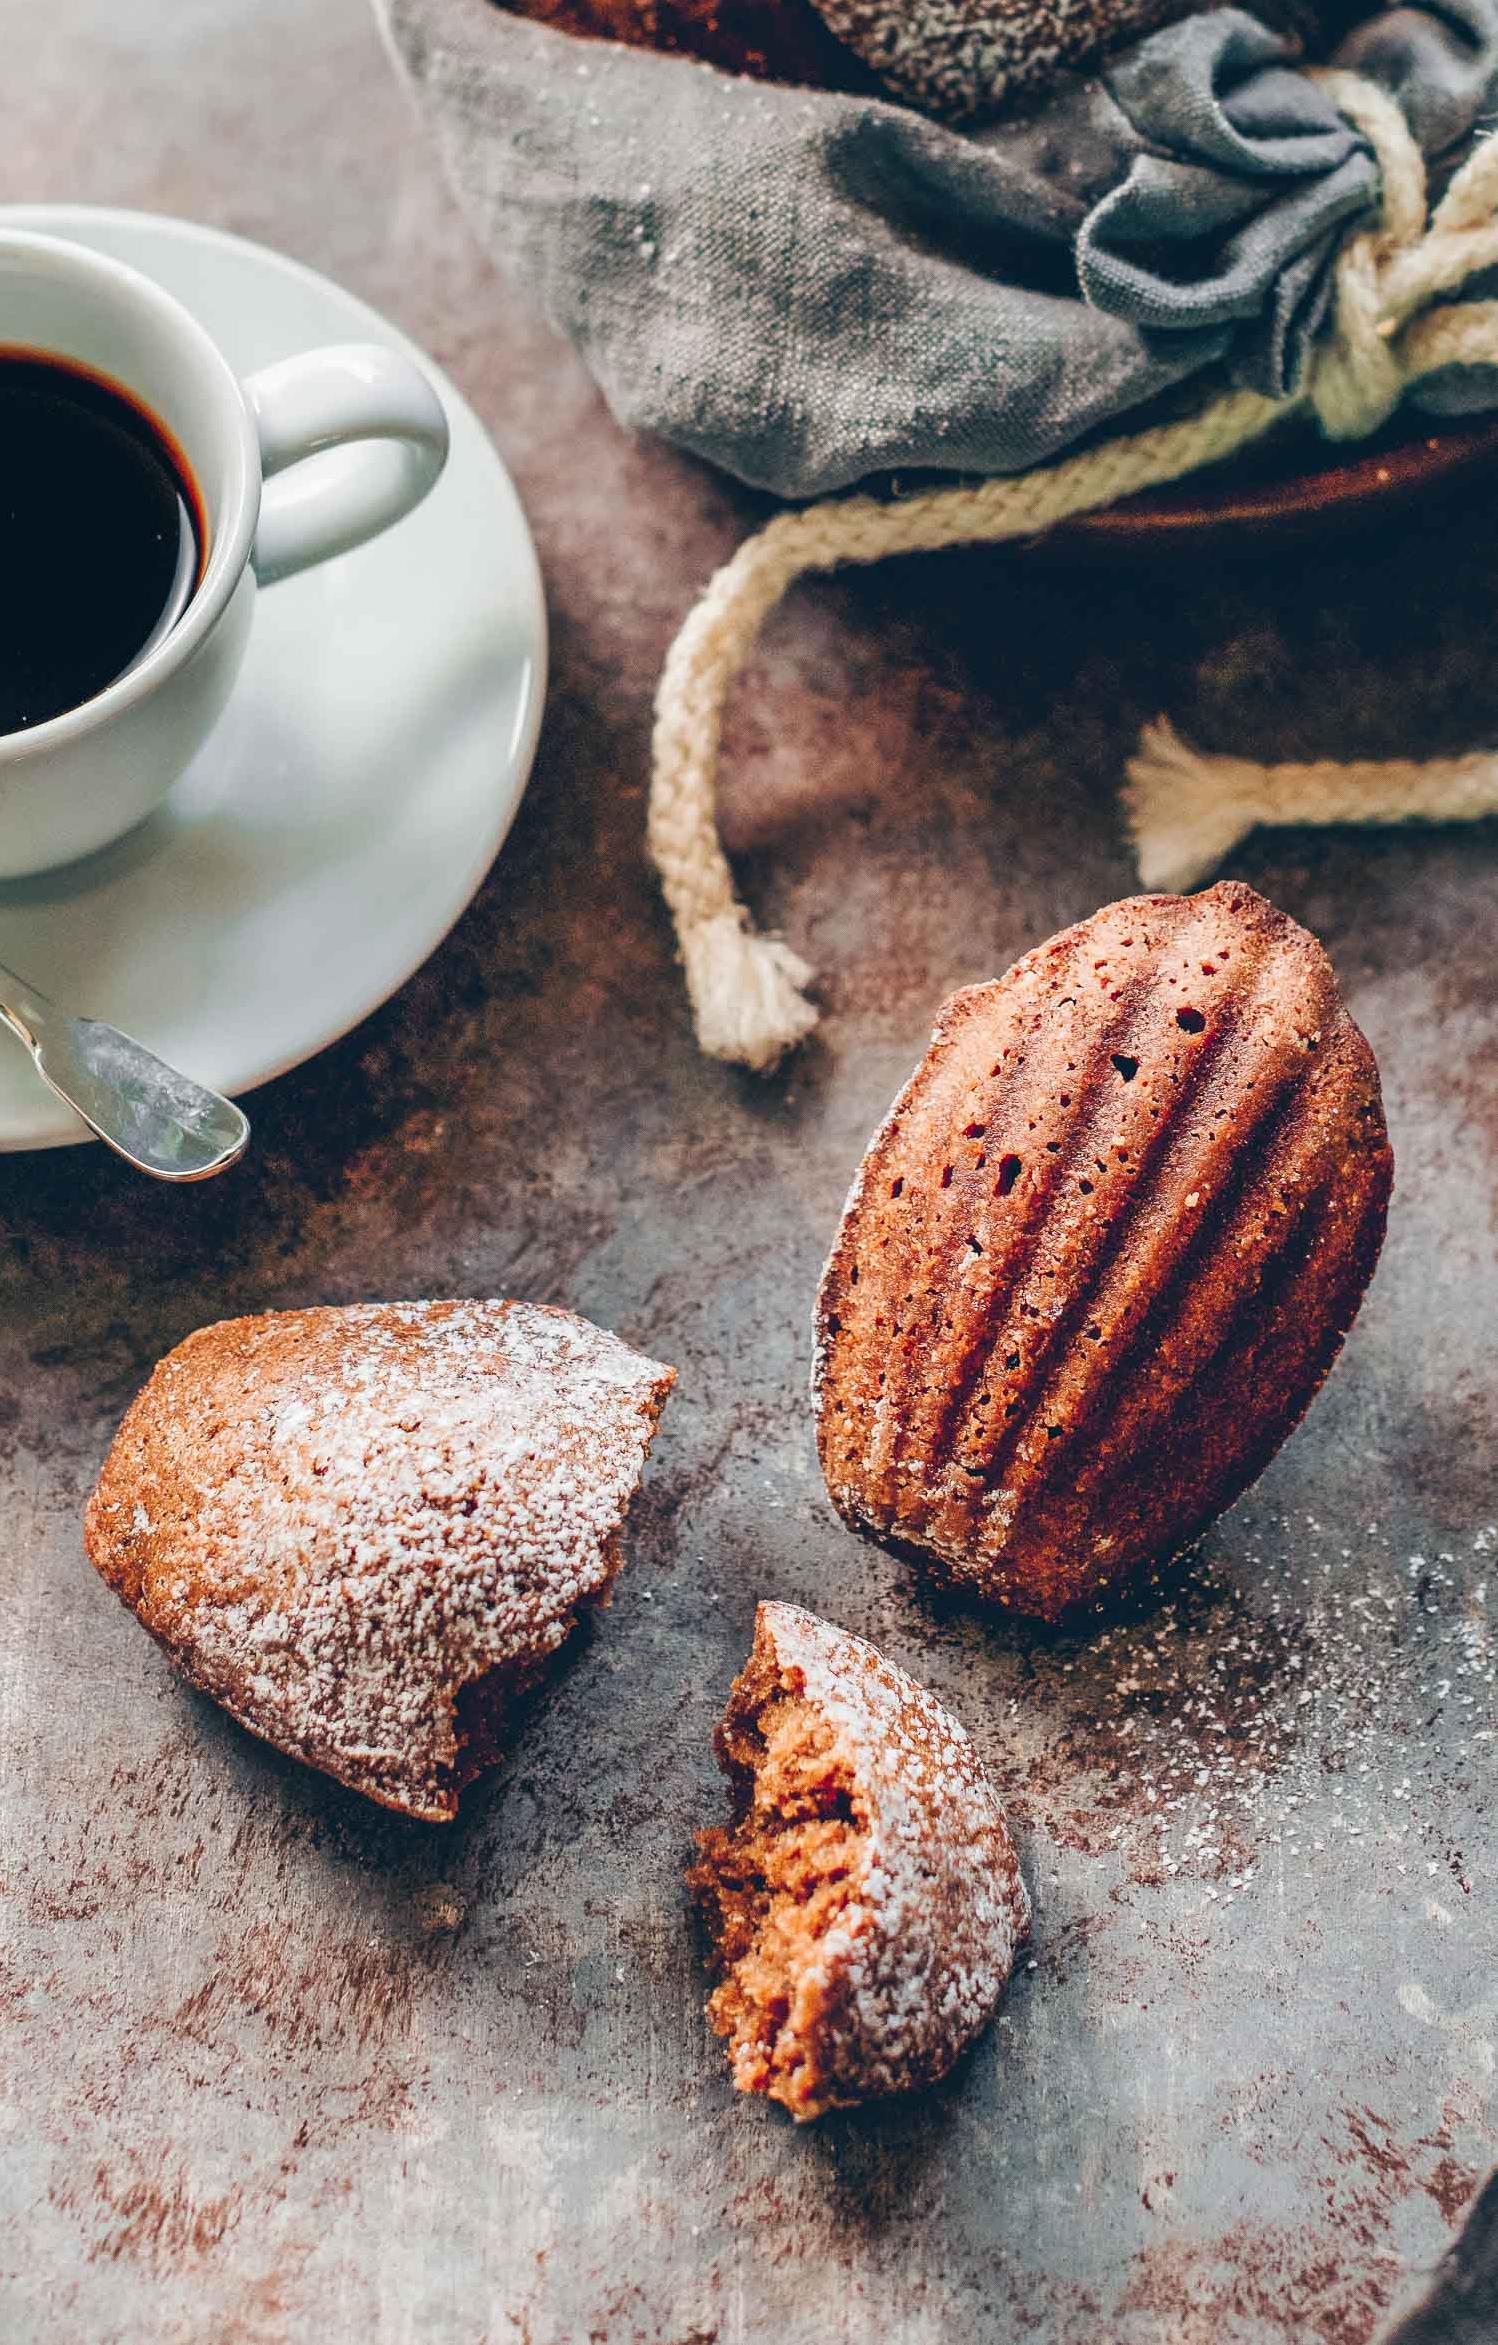  Introducing Coffee Madeleines, the perfect little treat to enjoy with your morning coffee